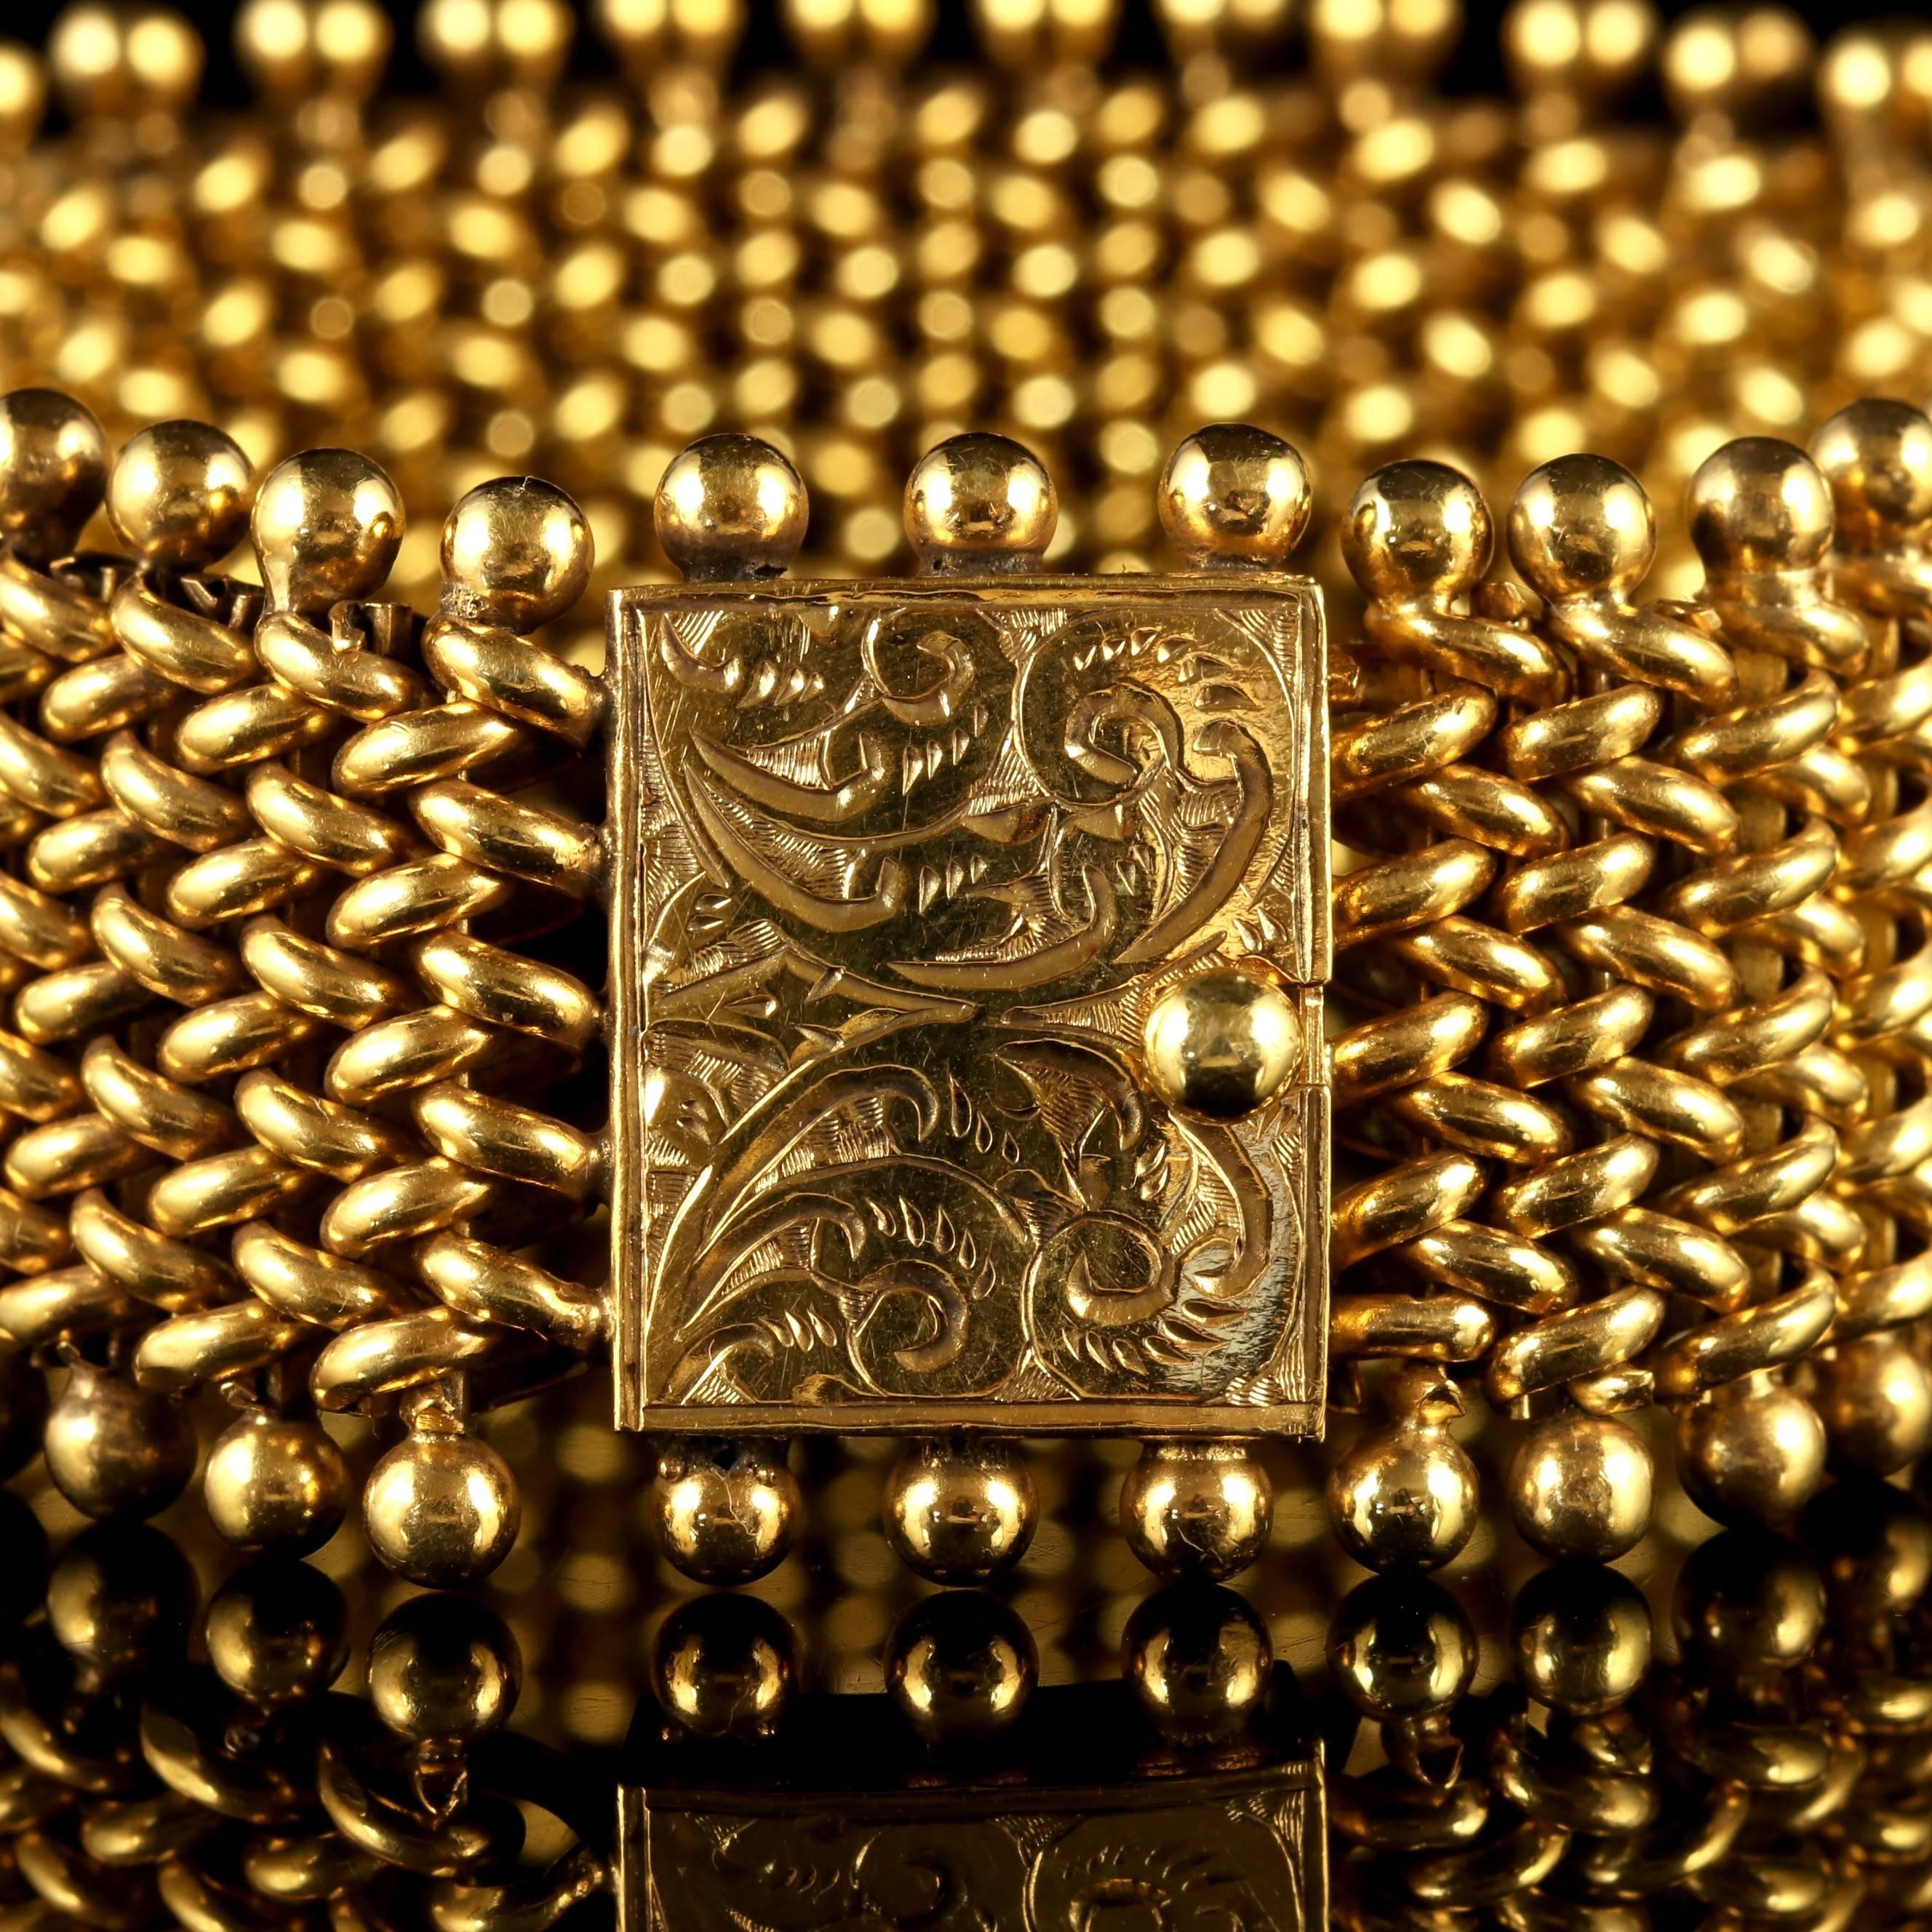 This beautiful large Victorian 18ct Gold on Silver bracelet is Circa 1900.

The clasp is engraved with a floral pattern, this really is beautiful.

Each link shows pristine workmanship from it’s time.

This looks outstanding when worn and is steeped